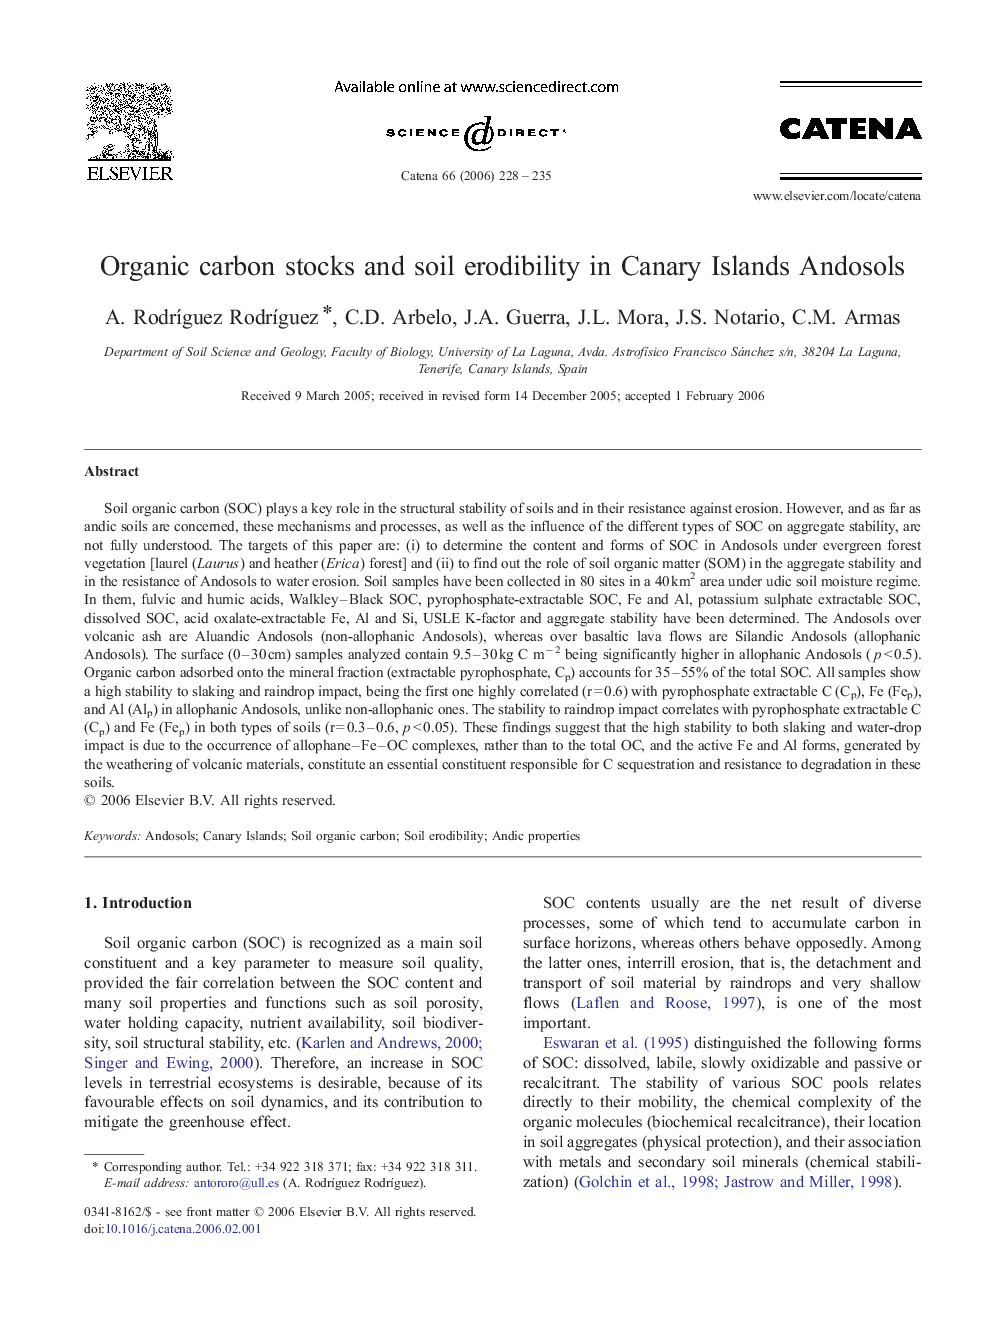 Organic carbon stocks and soil erodibility in Canary Islands Andosols